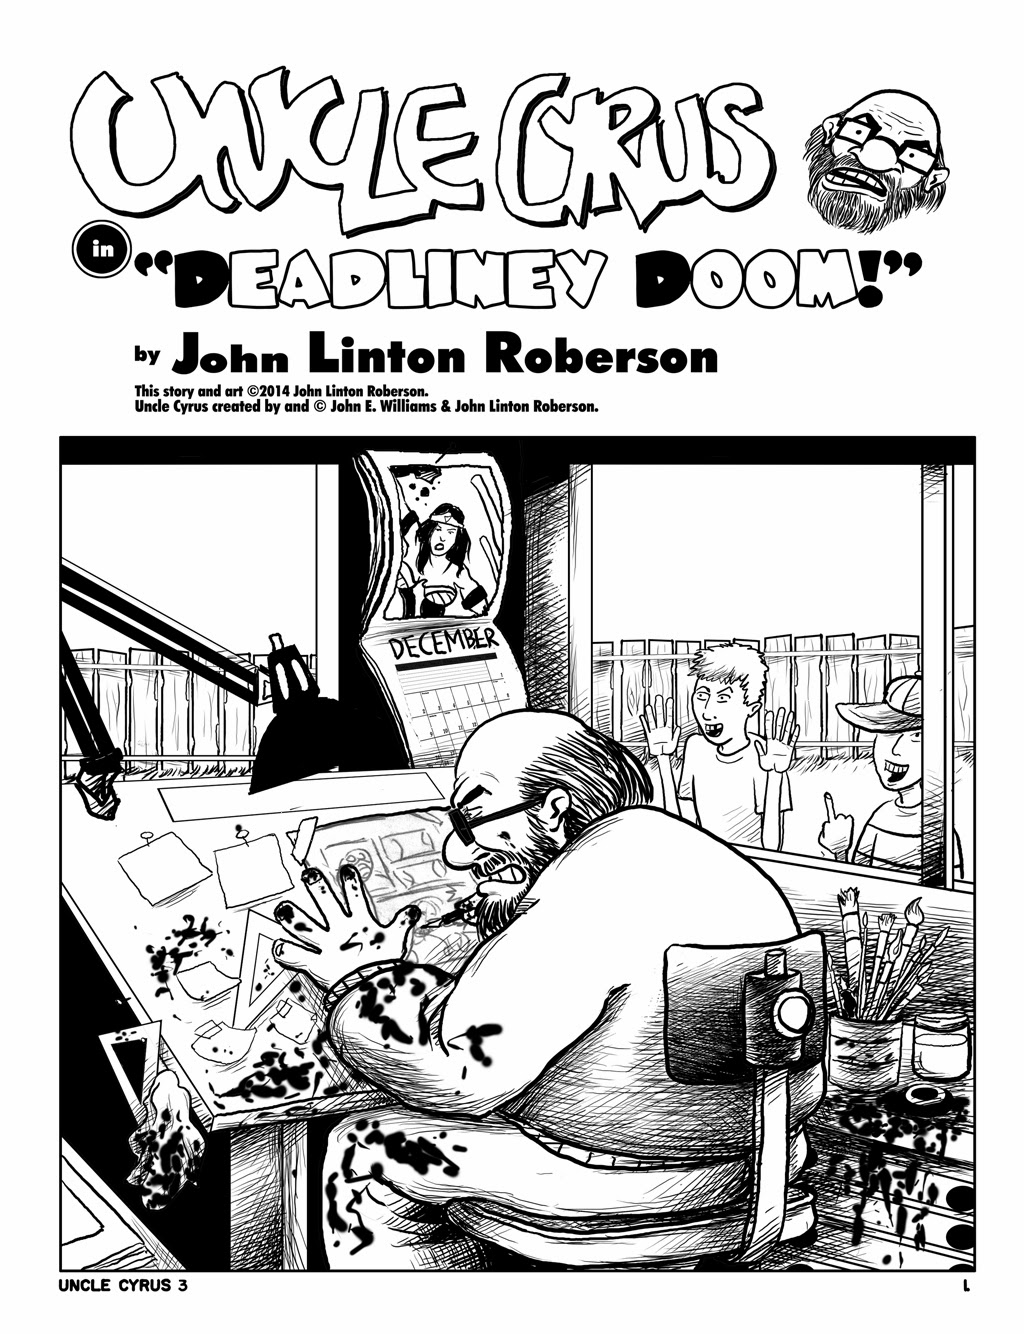 UNCLE CYRUS Story 3 - p. 1 inked (unlettered) ©2014 John Linton Roberson.